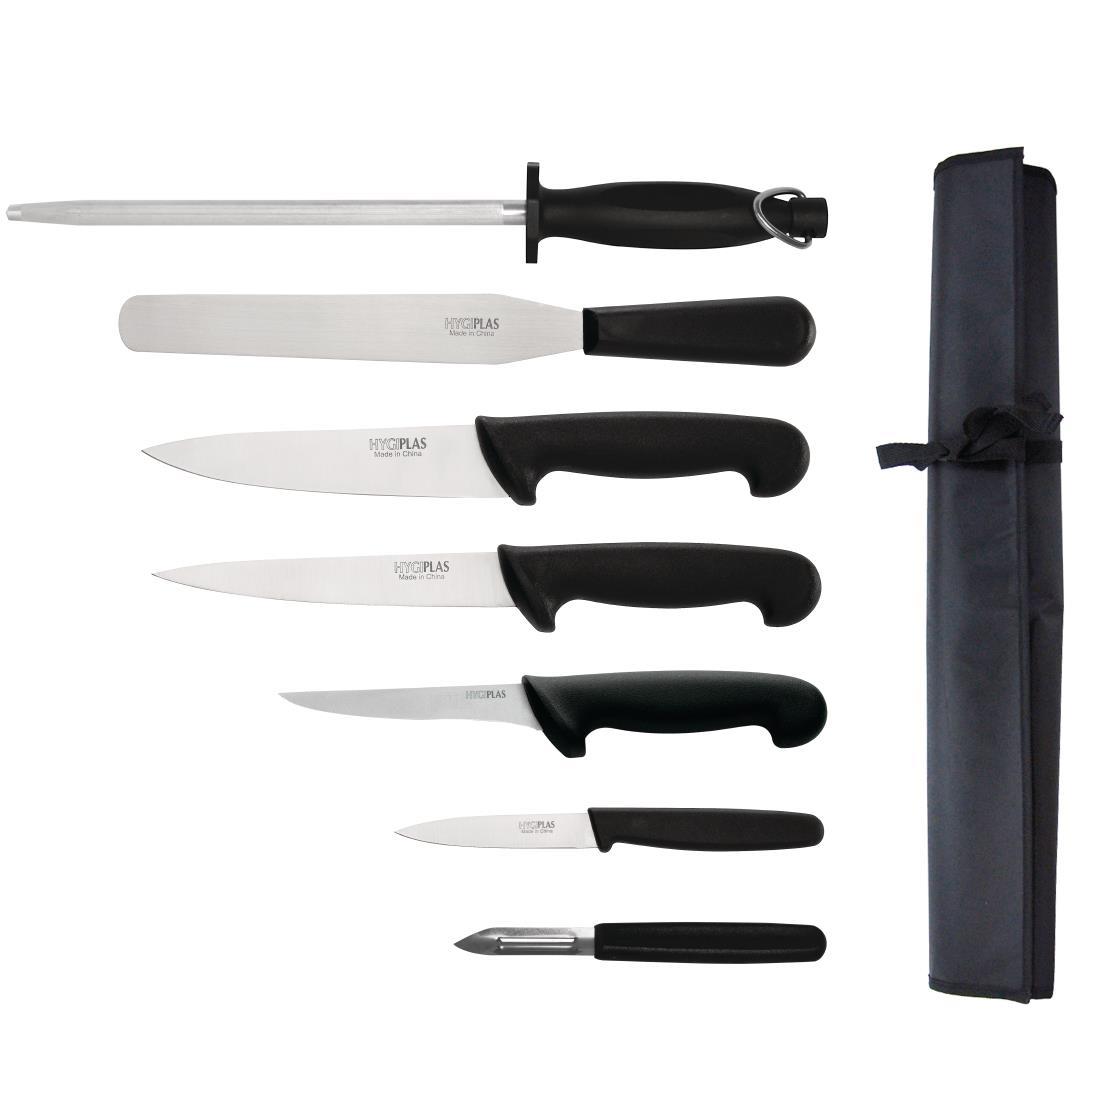 Hygiplas 7 Piece Starter Knife Set With 20cm Chef Knife and Roll Bag - F222  - 1